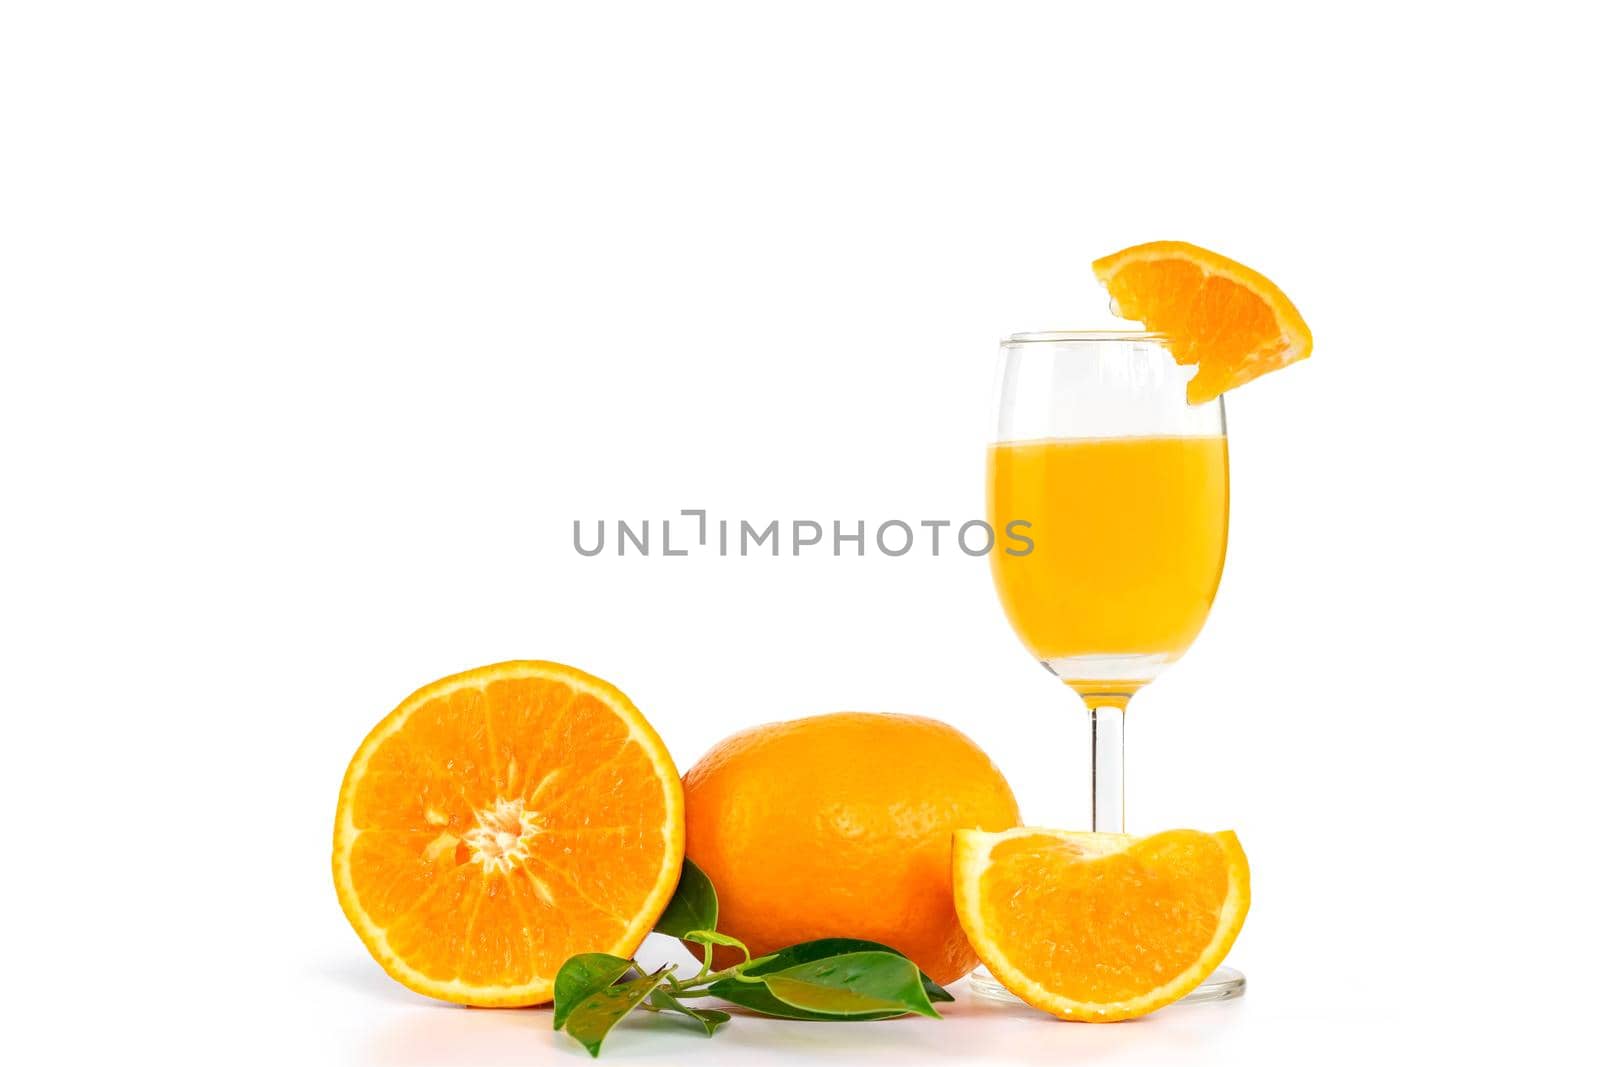 Freshly squeezed orange juice in a glass, decorated with citrus fruits and orange leaves on white background with copy space.